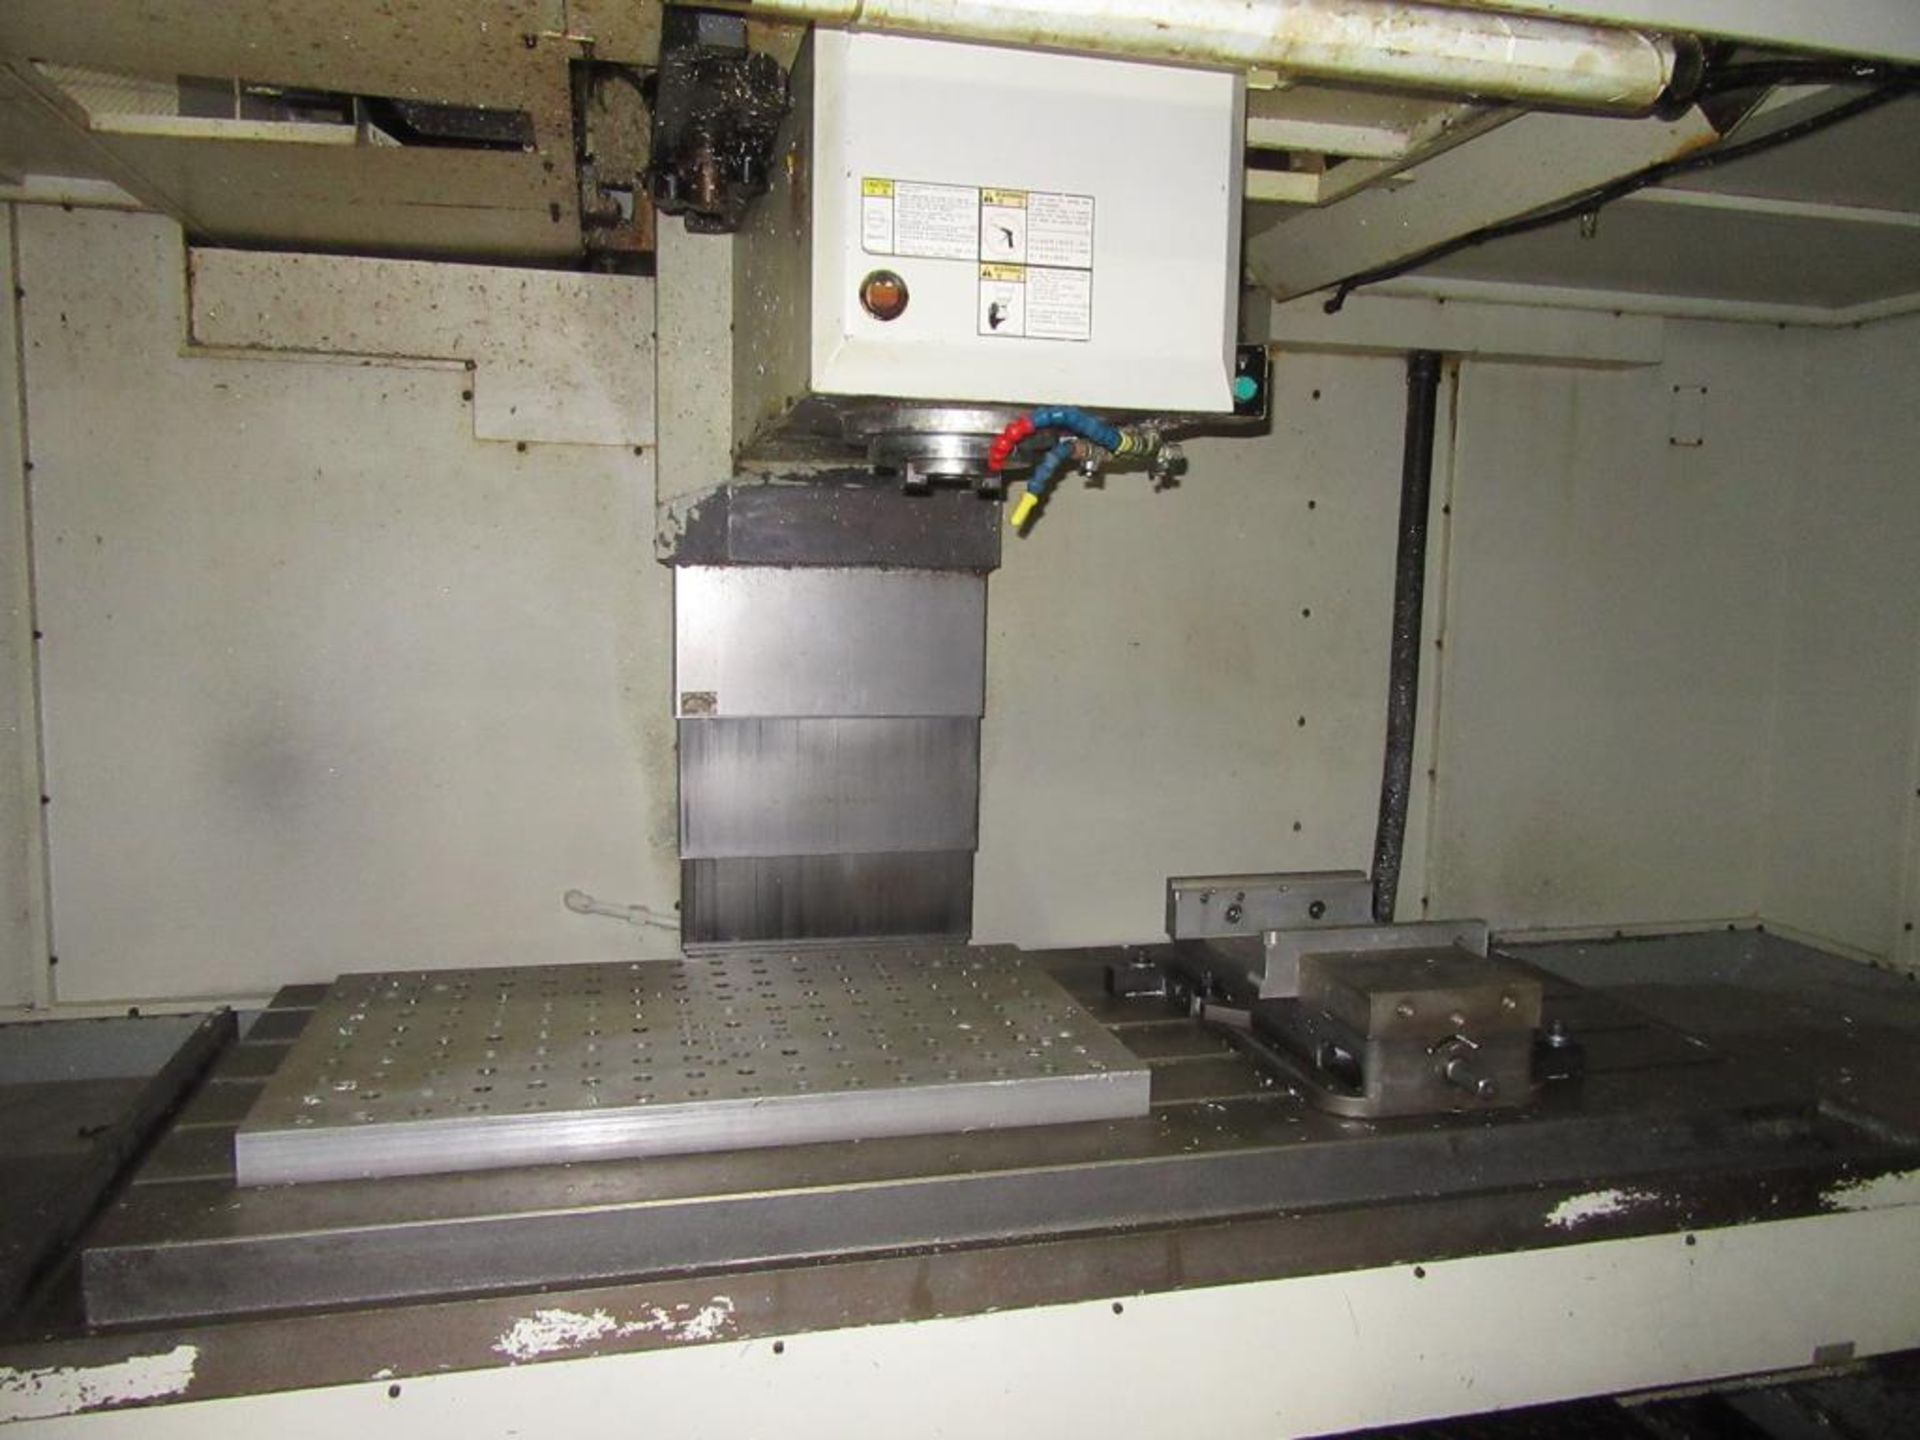 Mighty Viper VMC-1600A. 2006 - CNC Vertical Machining Center with Fanuc 21i-MB 3-Axis Control Panel, - Image 7 of 22